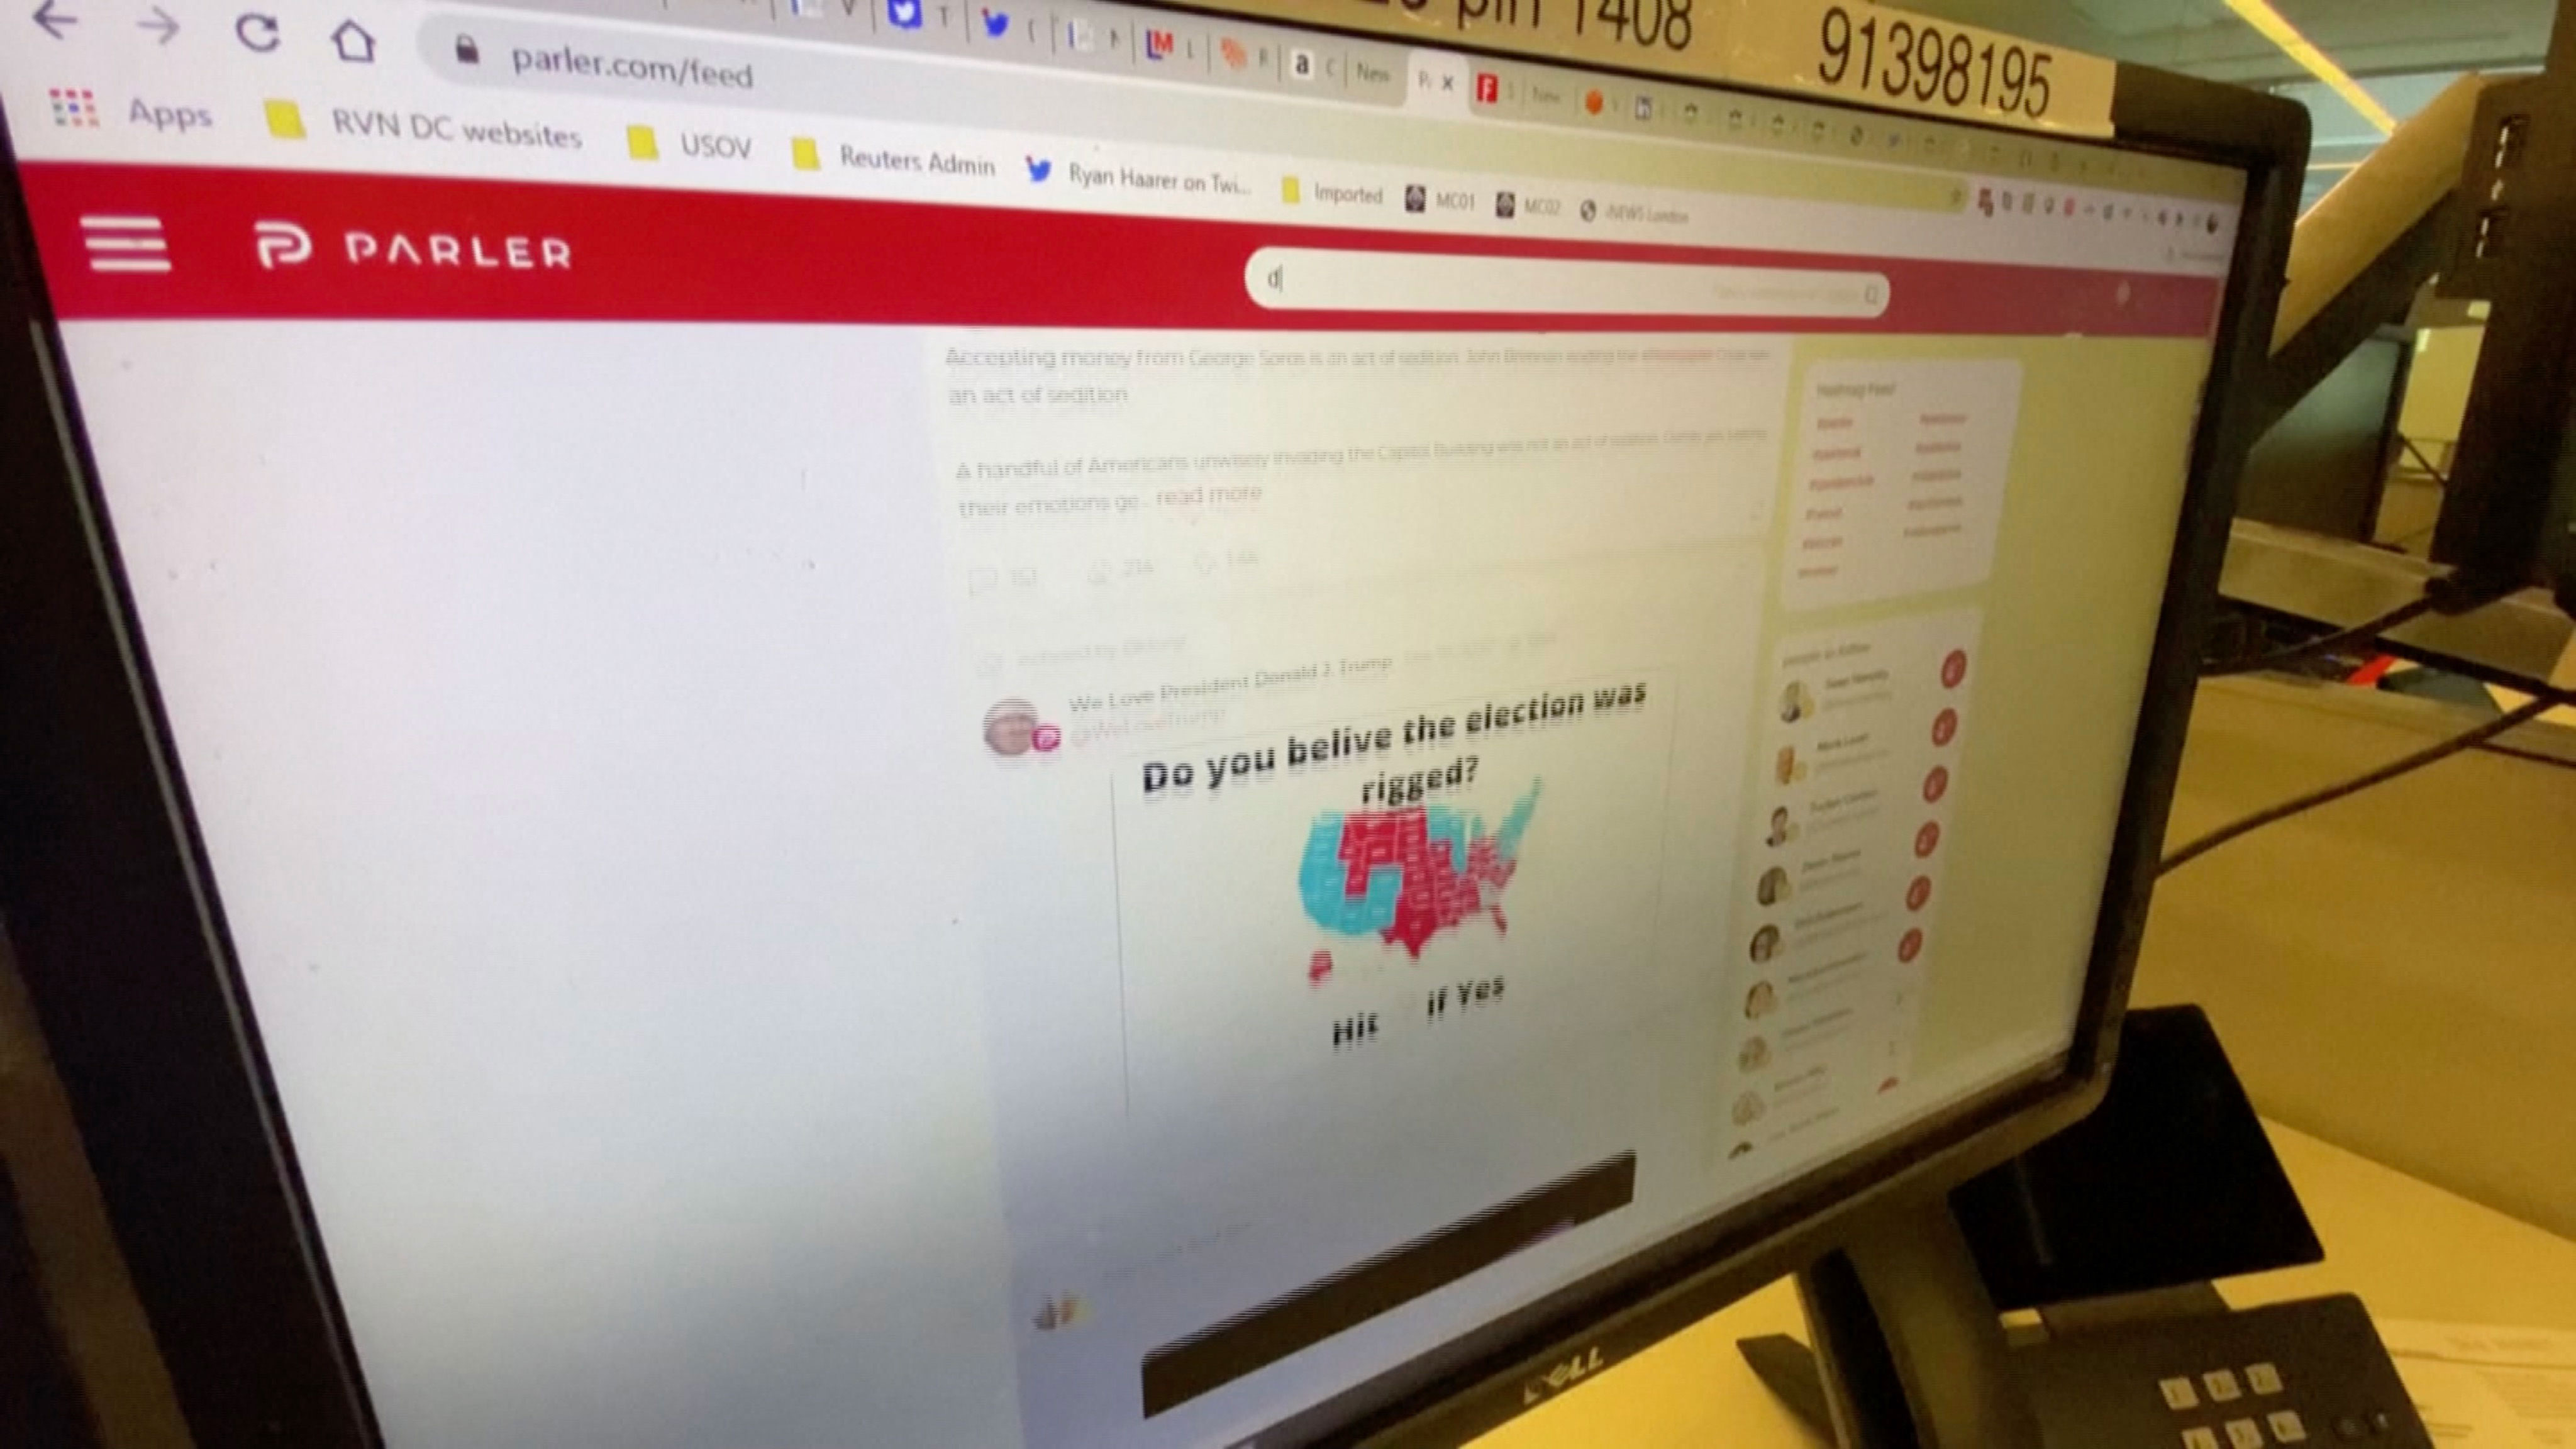 The Parler website is seen before its shutdown in this still from video